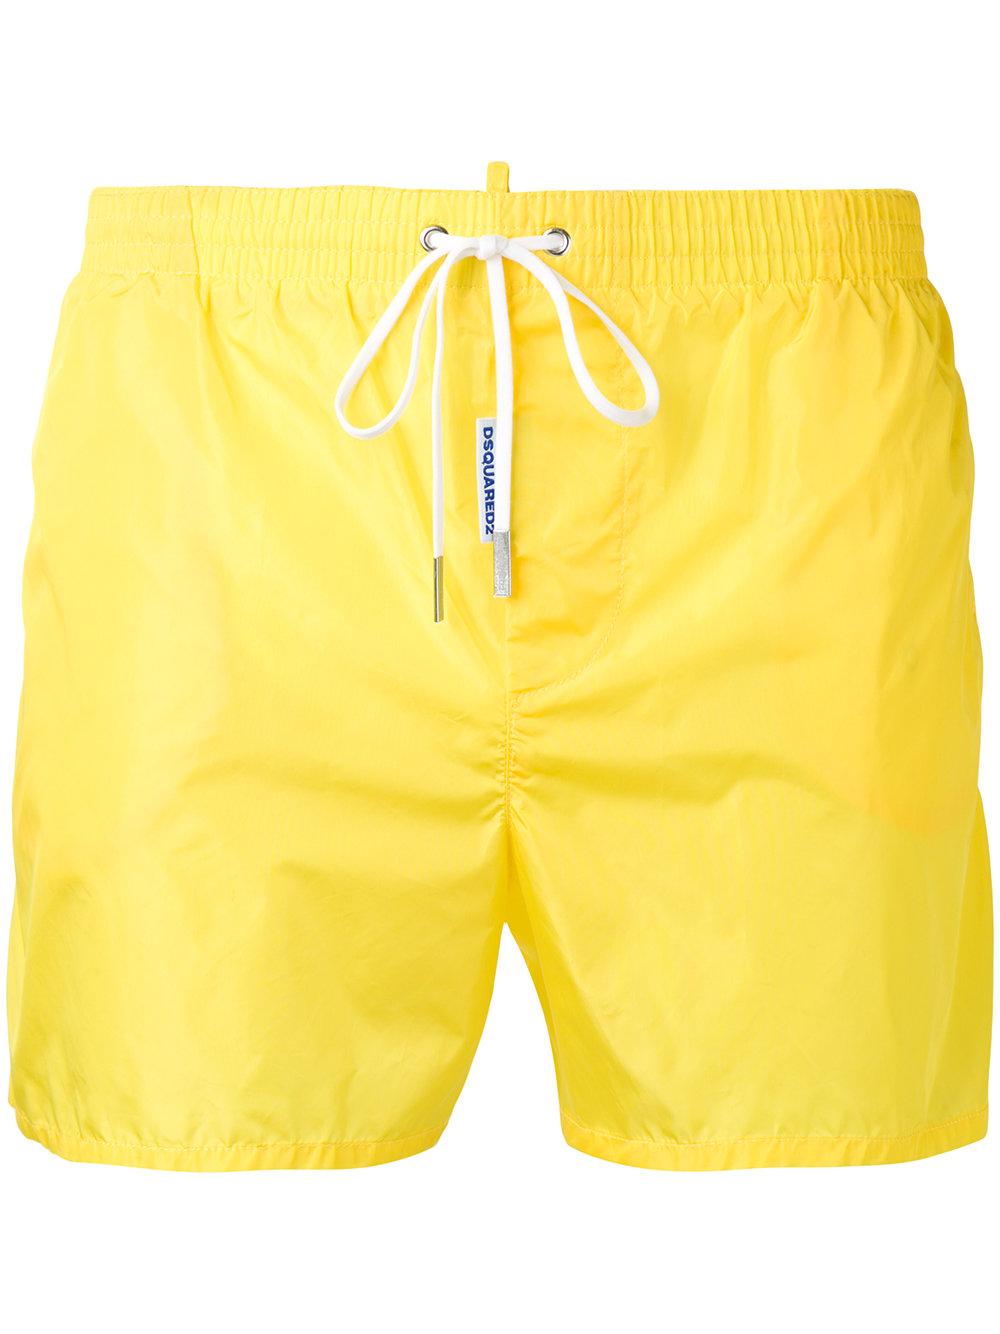 Dsquared² Classic Swim Shorts in Yellow for Men | Lyst